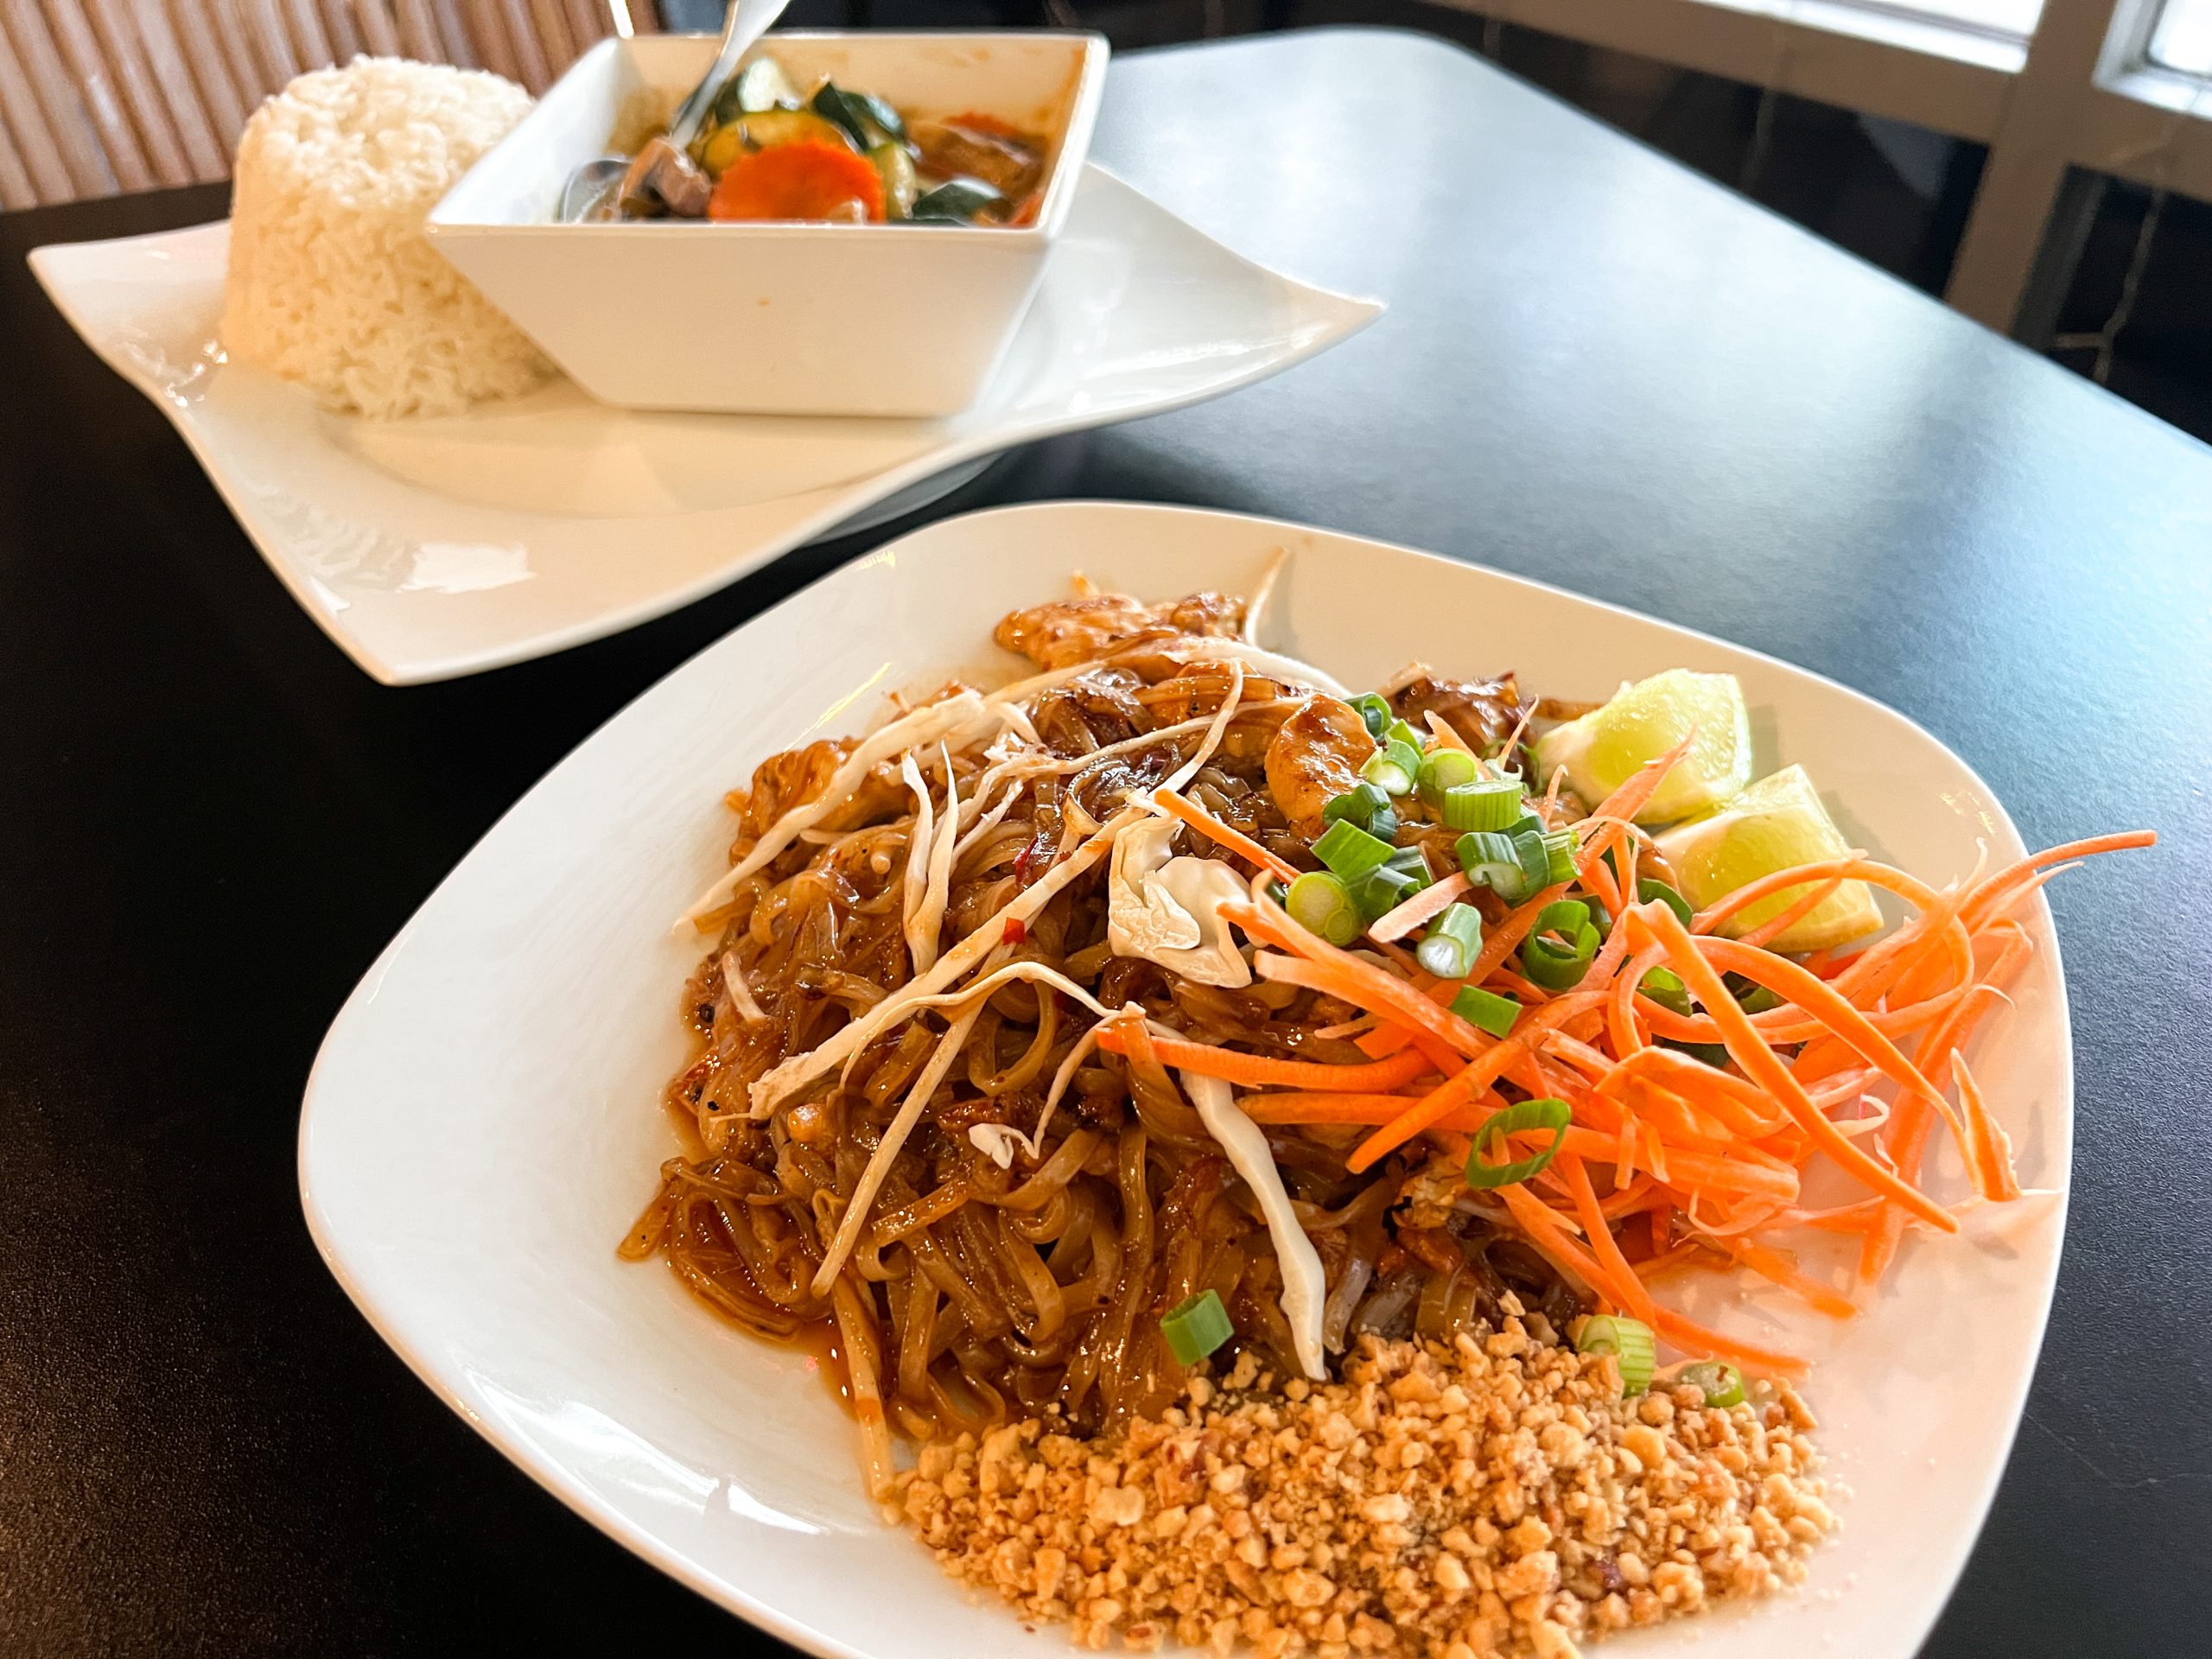 The Pad Thai and the Panang Curry in the background - two of the most popular dishes at Tummy Thai